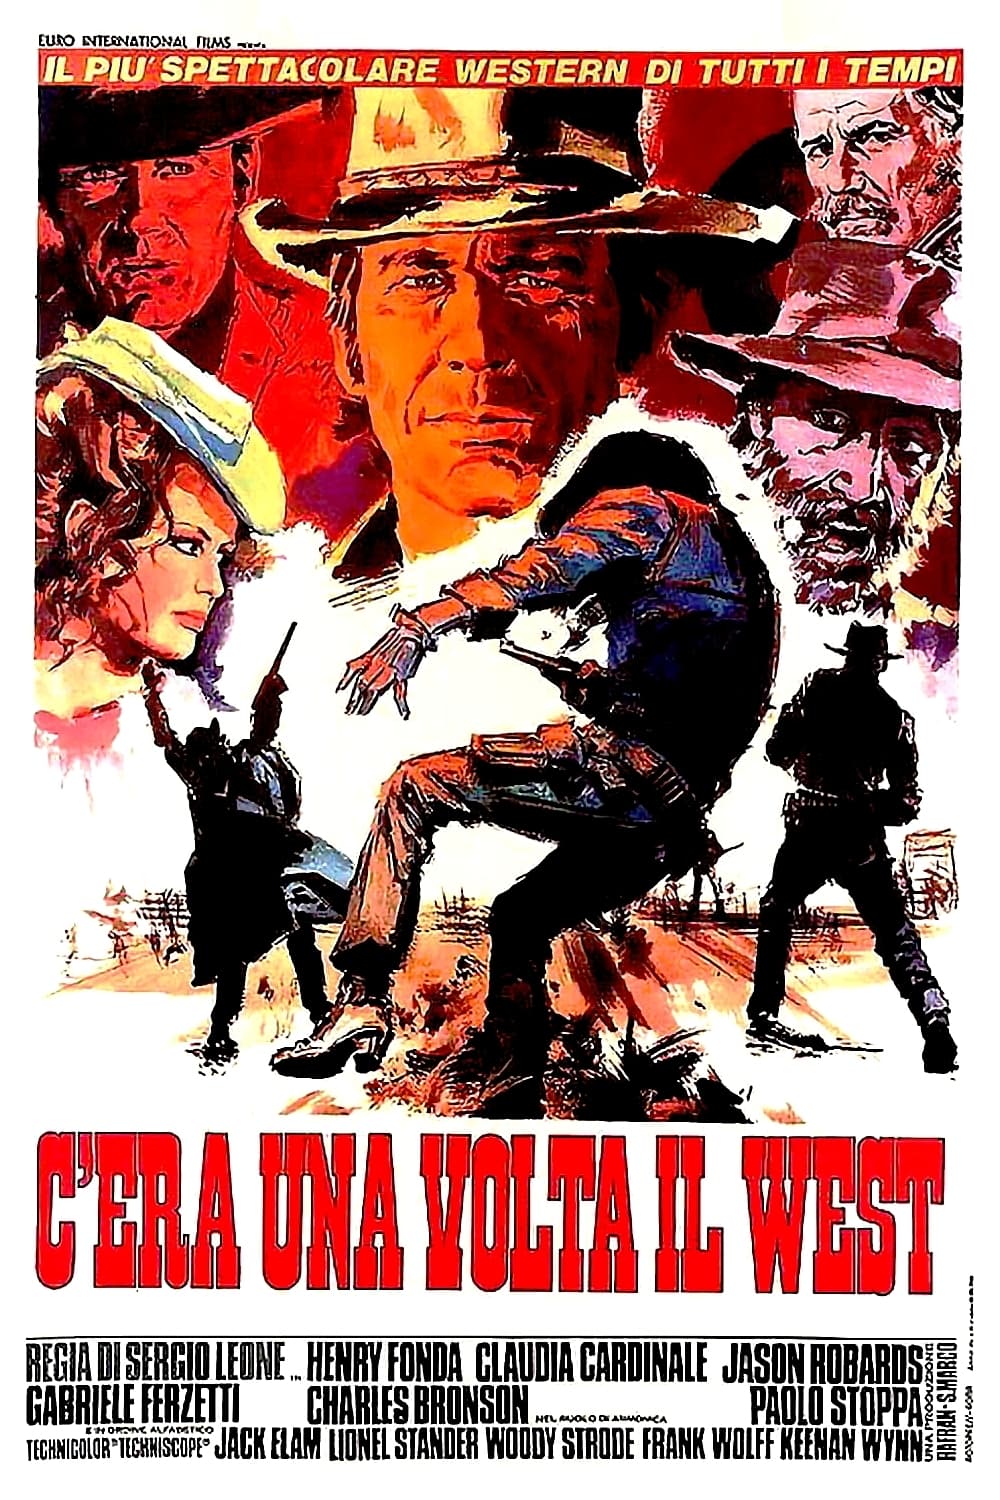 Miền Viễn Tây Ngày Ấy (Once Upon a Time in the West) [1968]